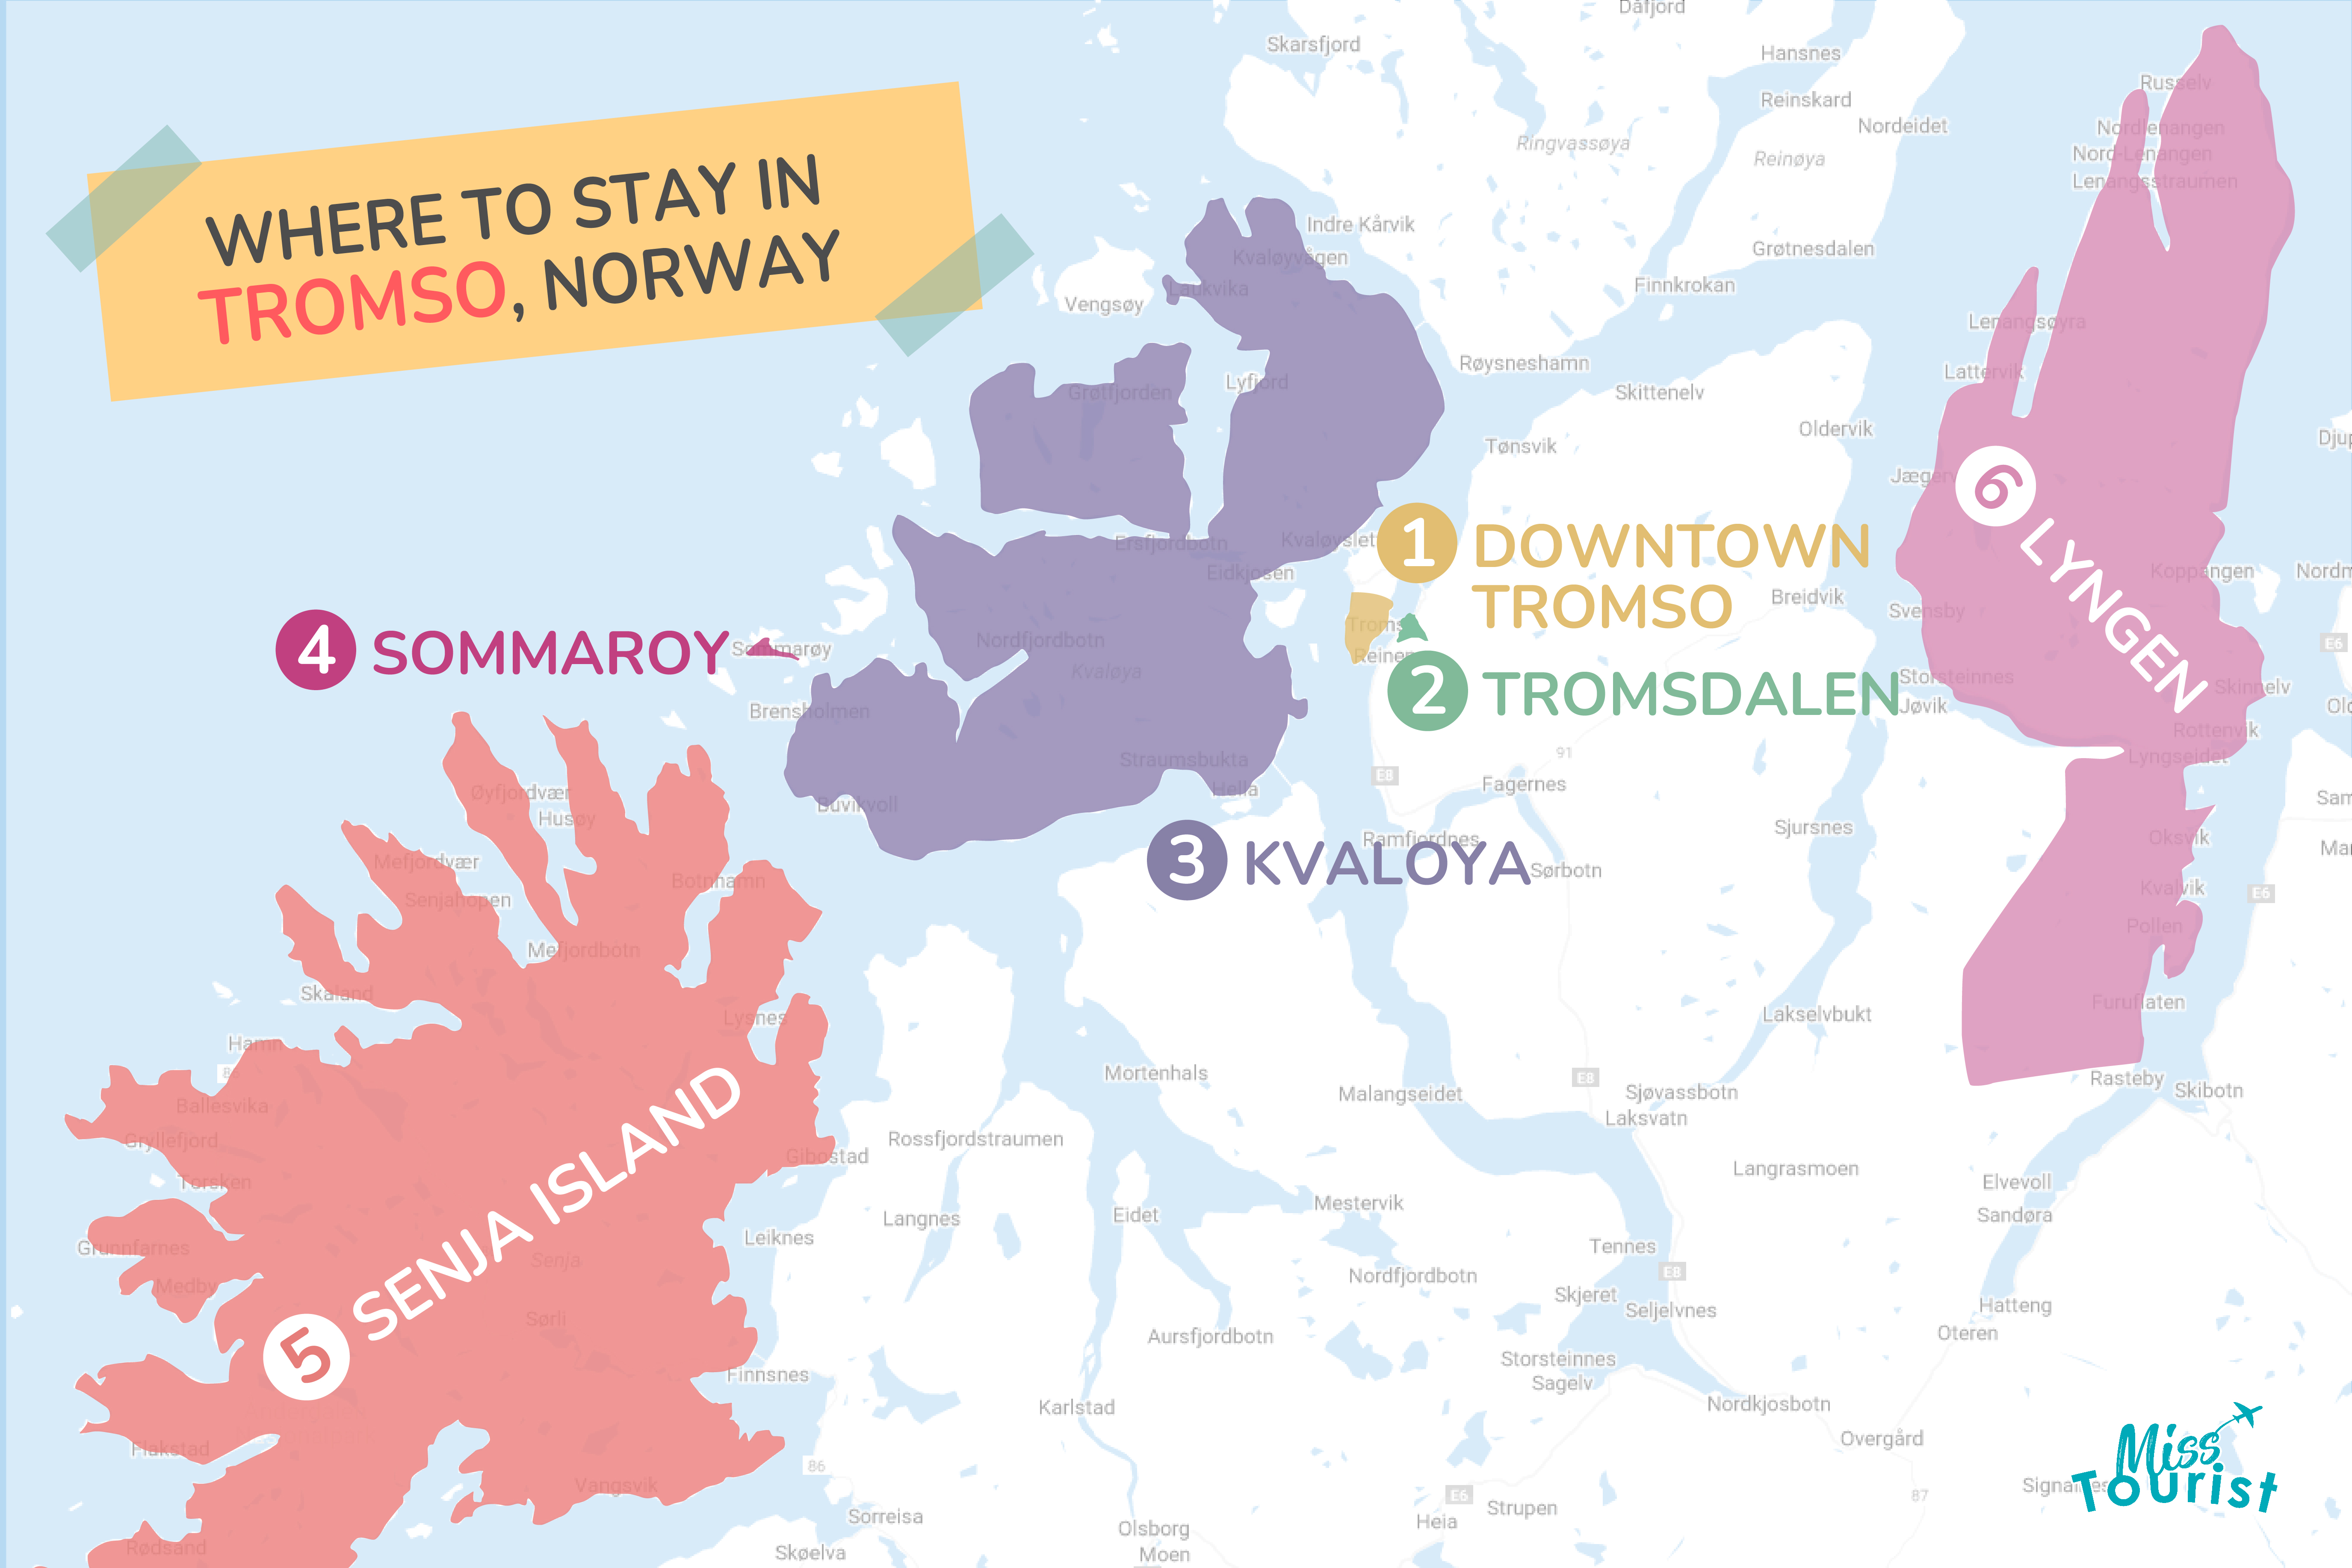 Where to Stay in Tromso MAP